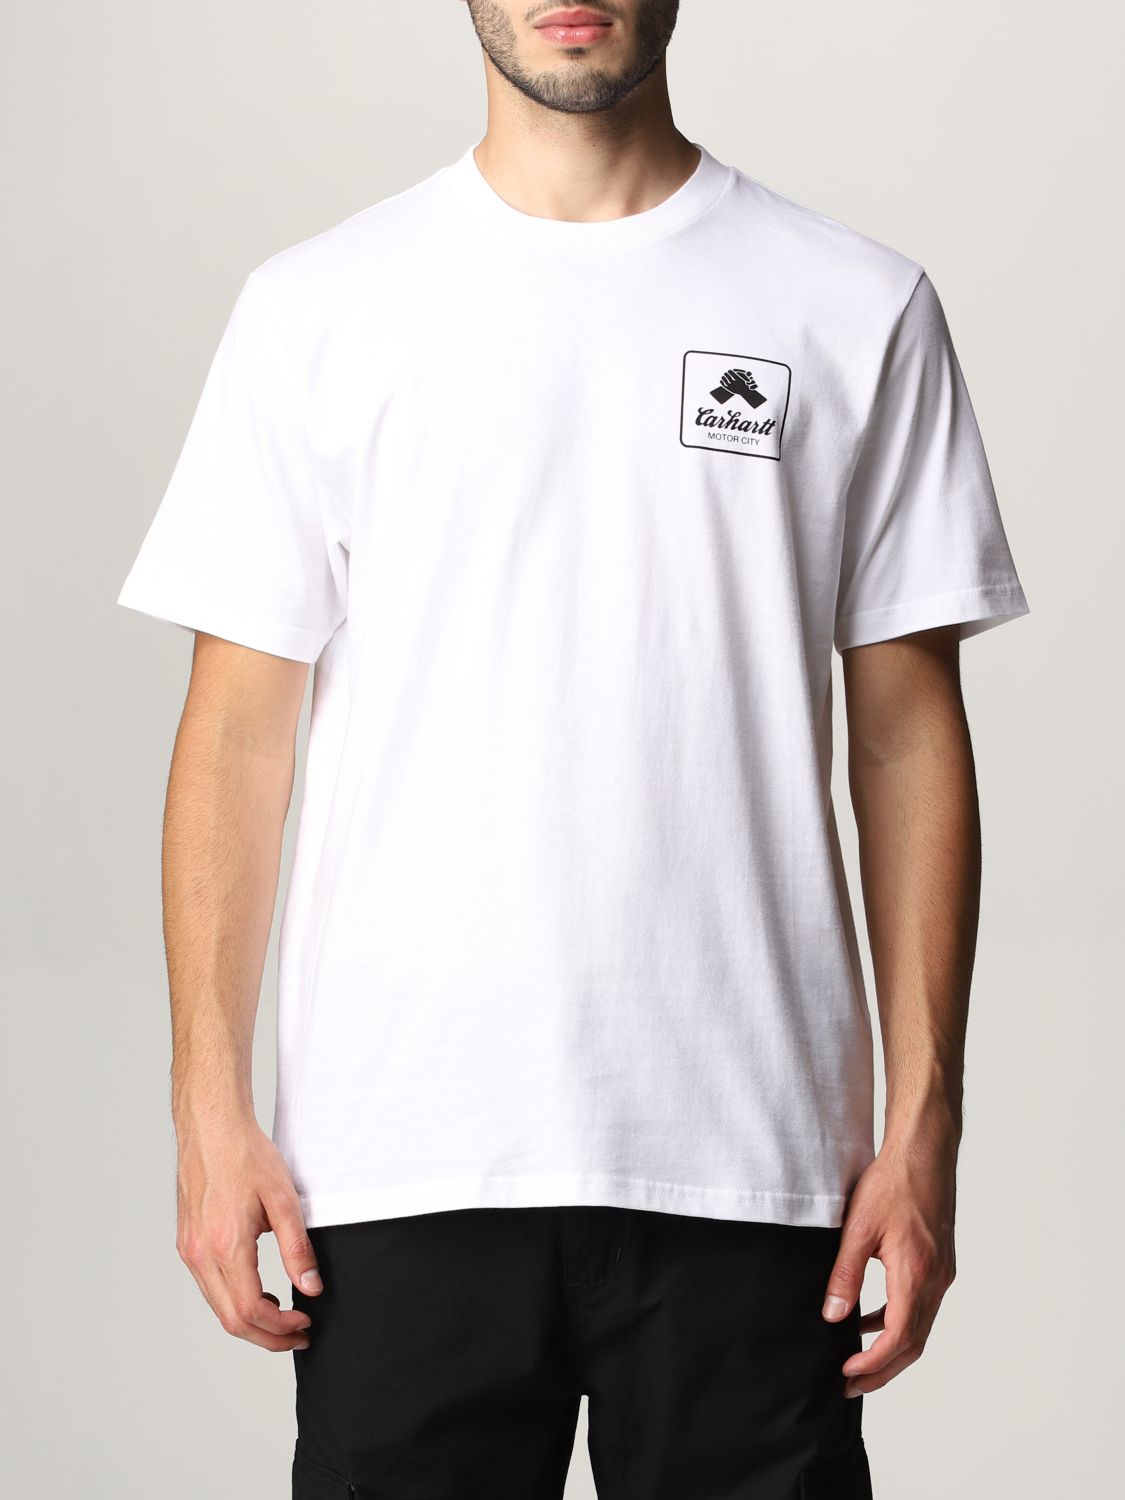 CARHARTT WIP: Carhartt t-shirt in cotton with back print - White | Wip t-shirt I02893103 online GIGLIO.COM